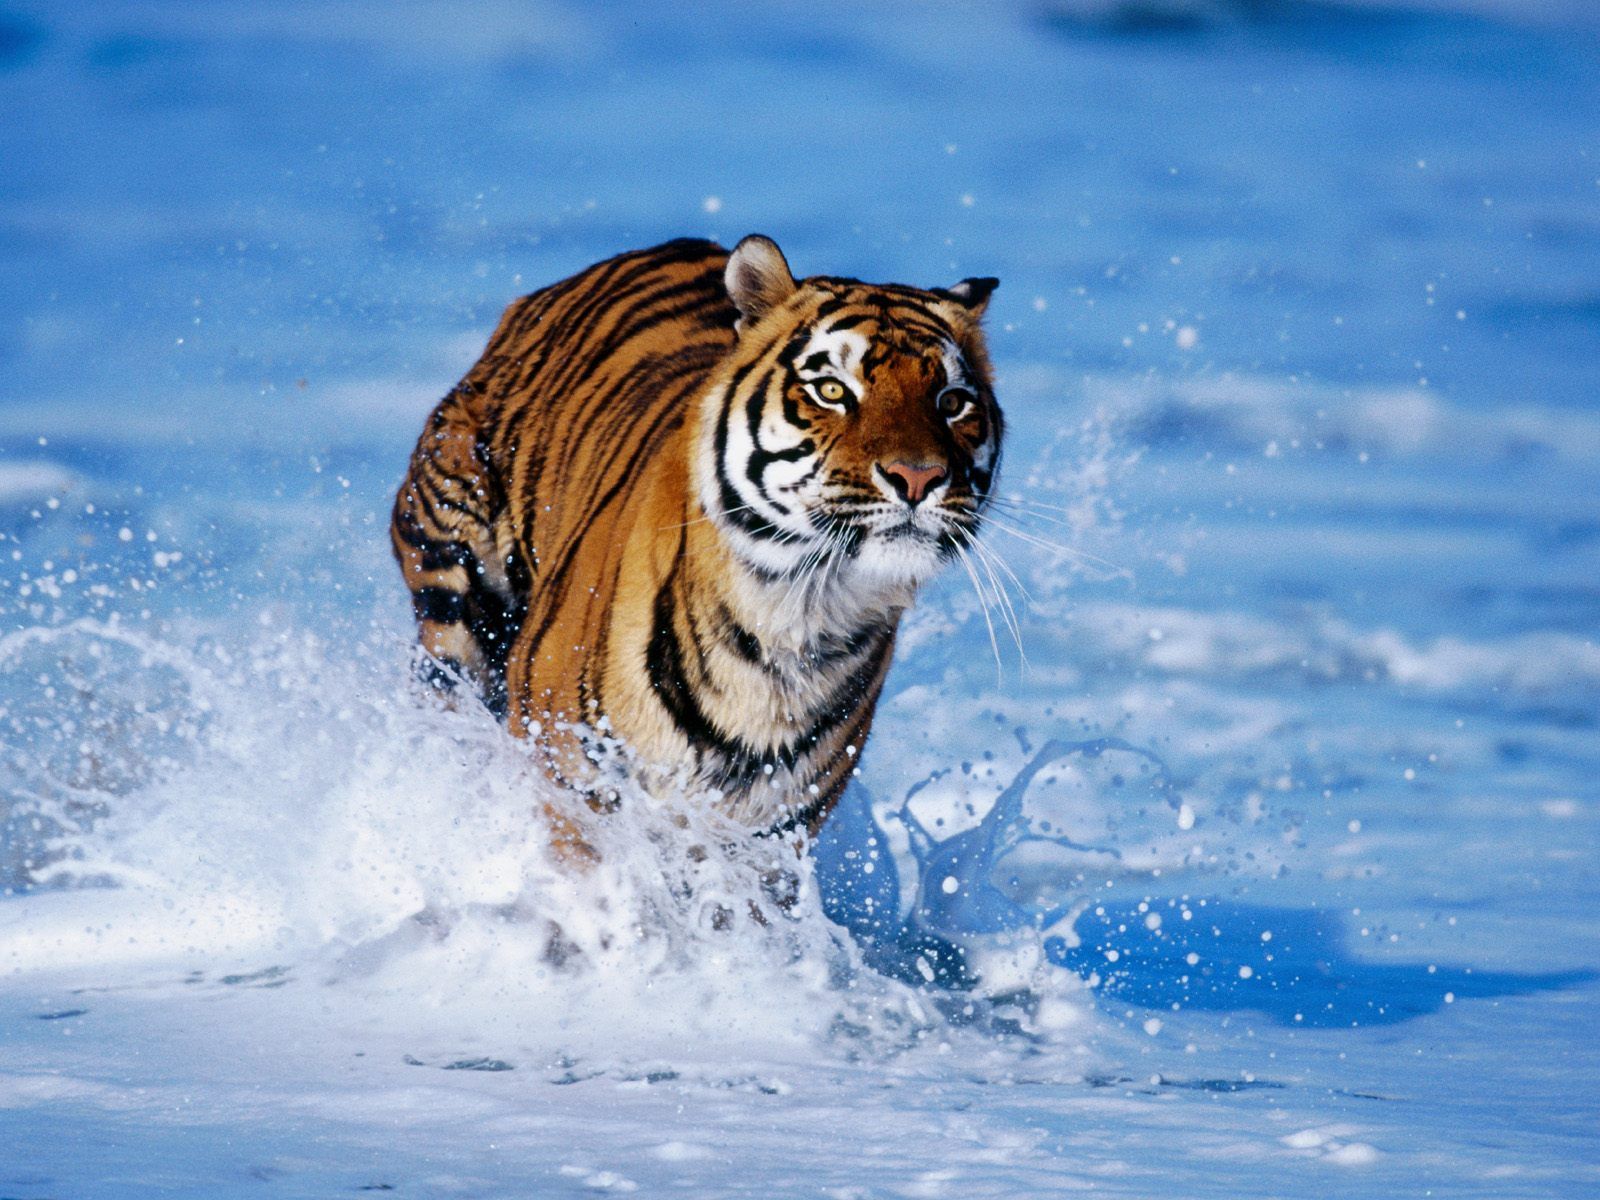 Tiger Full Screen Free HD Background Awesome Wallpapers